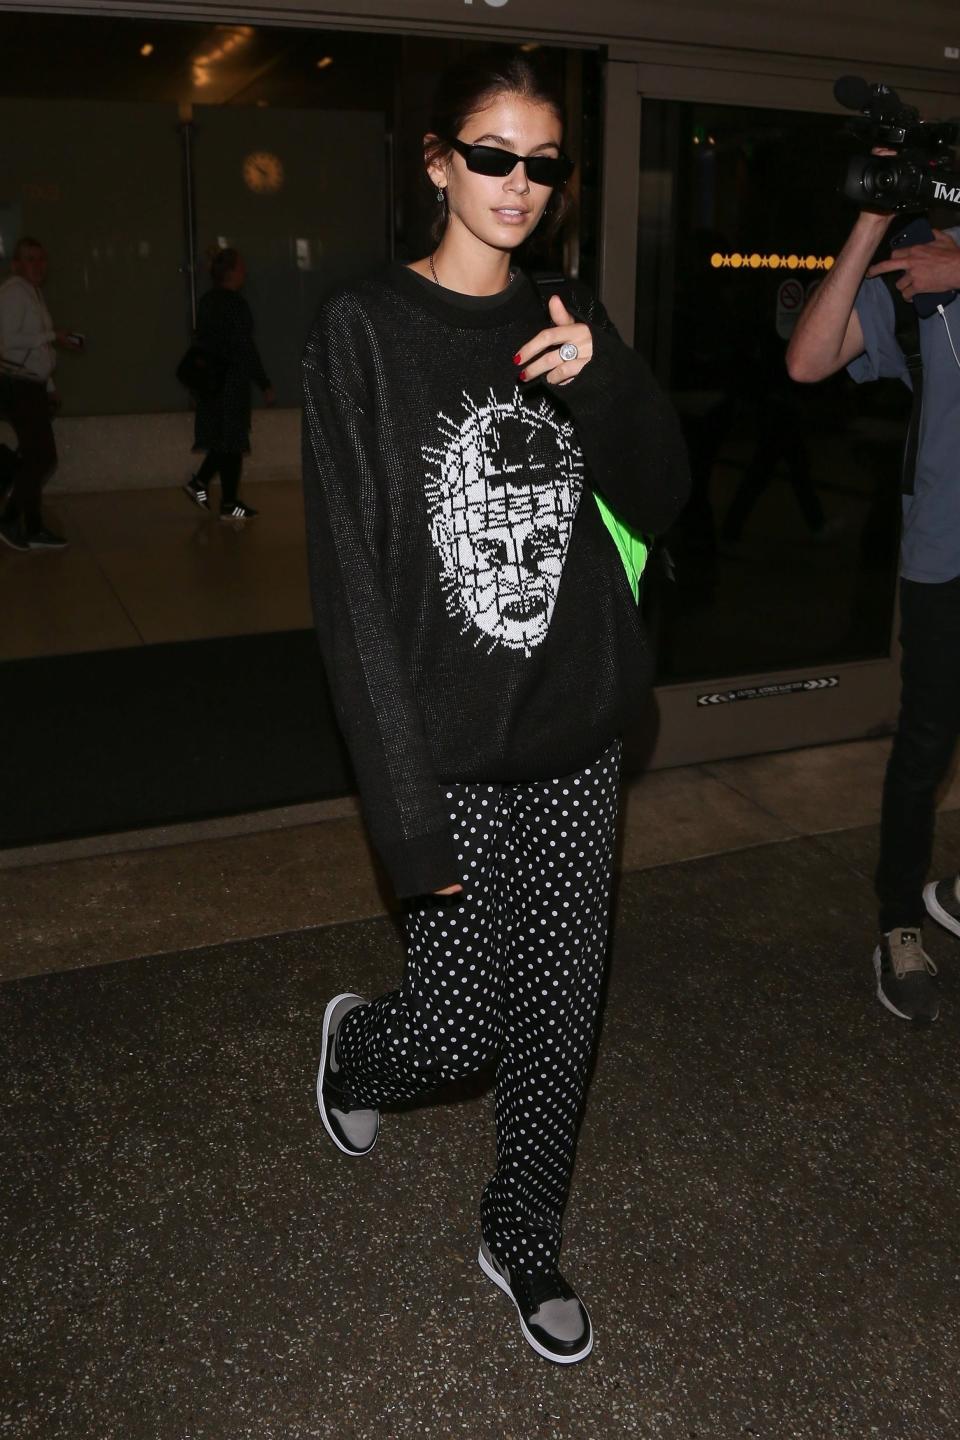 Los Angeles, CA  - EXCLUSIVE  - Model Kaia Gerber is seen arriving on a flight at LAX airport in Los Angeles. Kaia who was returning from Paris Fashion Week was rocking a black sweater with Pinhead from the movie &#39;Hellraiser&#39; on the front.Pictured: Kaia GerberBACKGRID USA 3 OCTOBER 2018 USA: +1 310 798 9111 / usasales@backgrid.comUK: +44 208 344 2007 / uksales@backgrid.comUK Clients - Pictures Containing ChildrenPlease Pixelate Face Prior To Publication